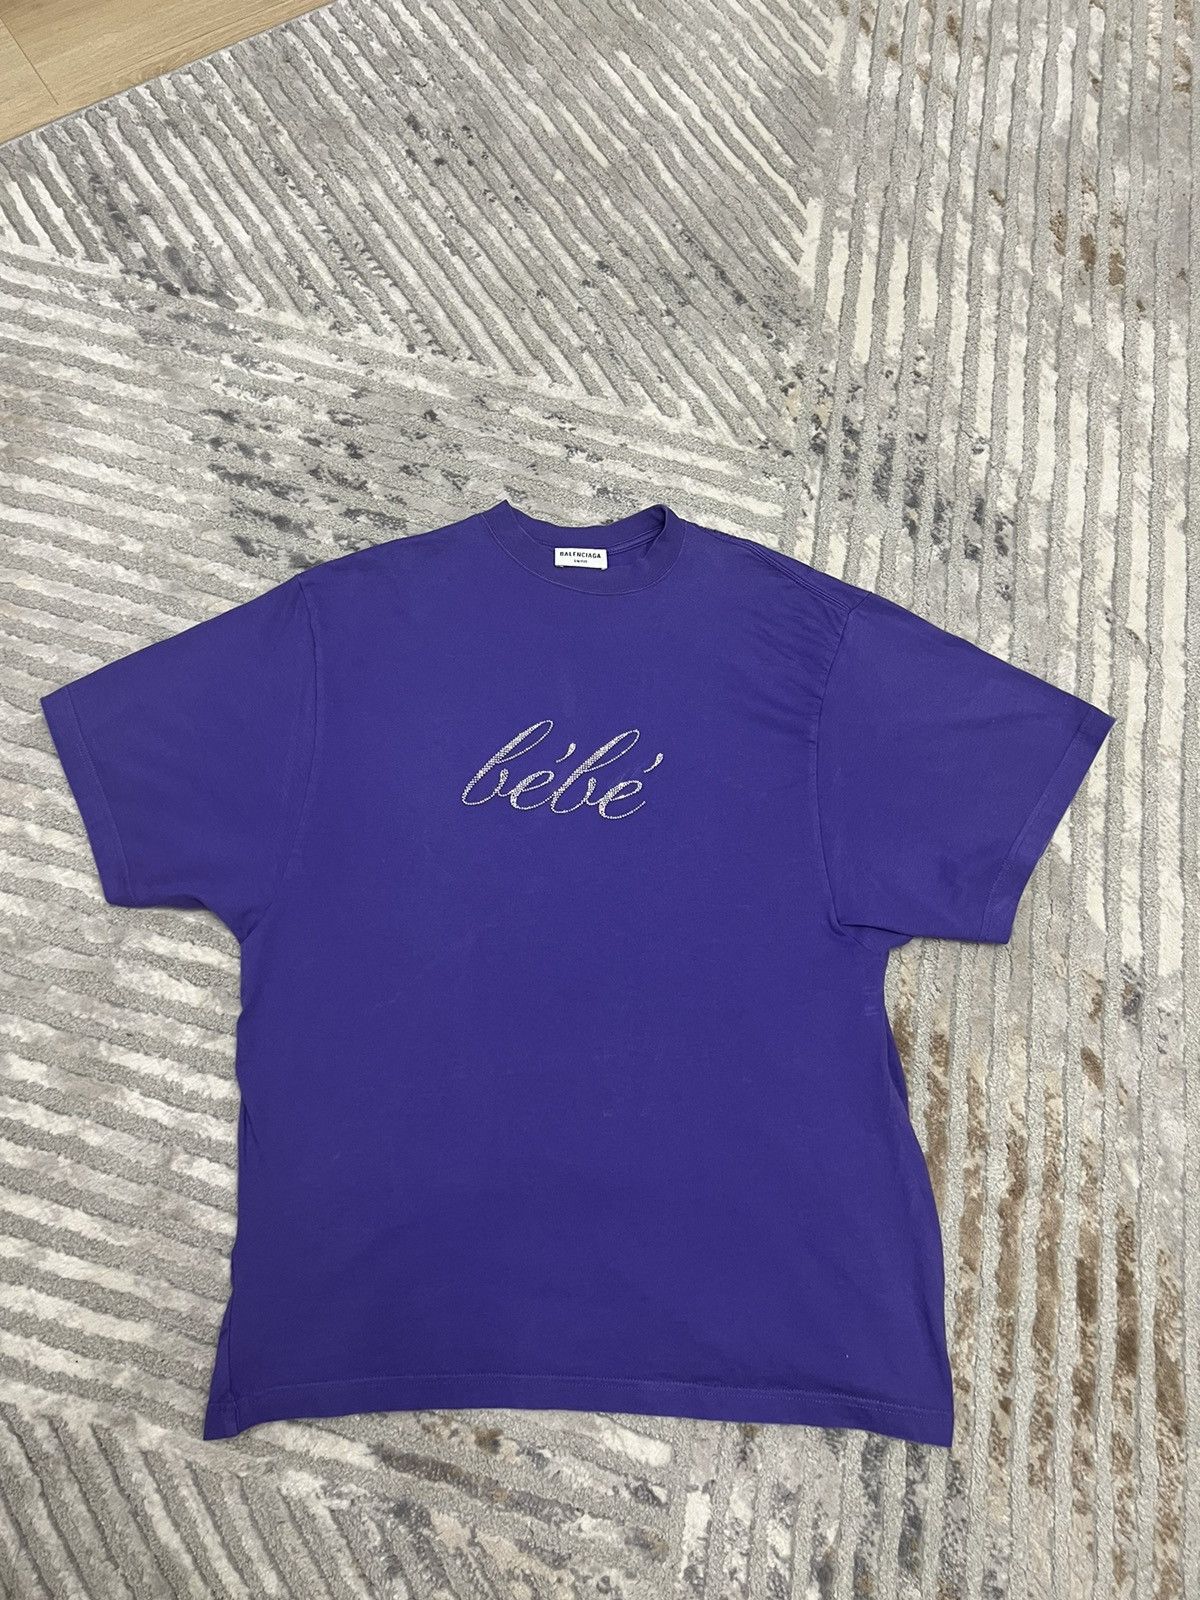 Pre-owned Balenciaga Bebe Worn Out Shirt In Purple